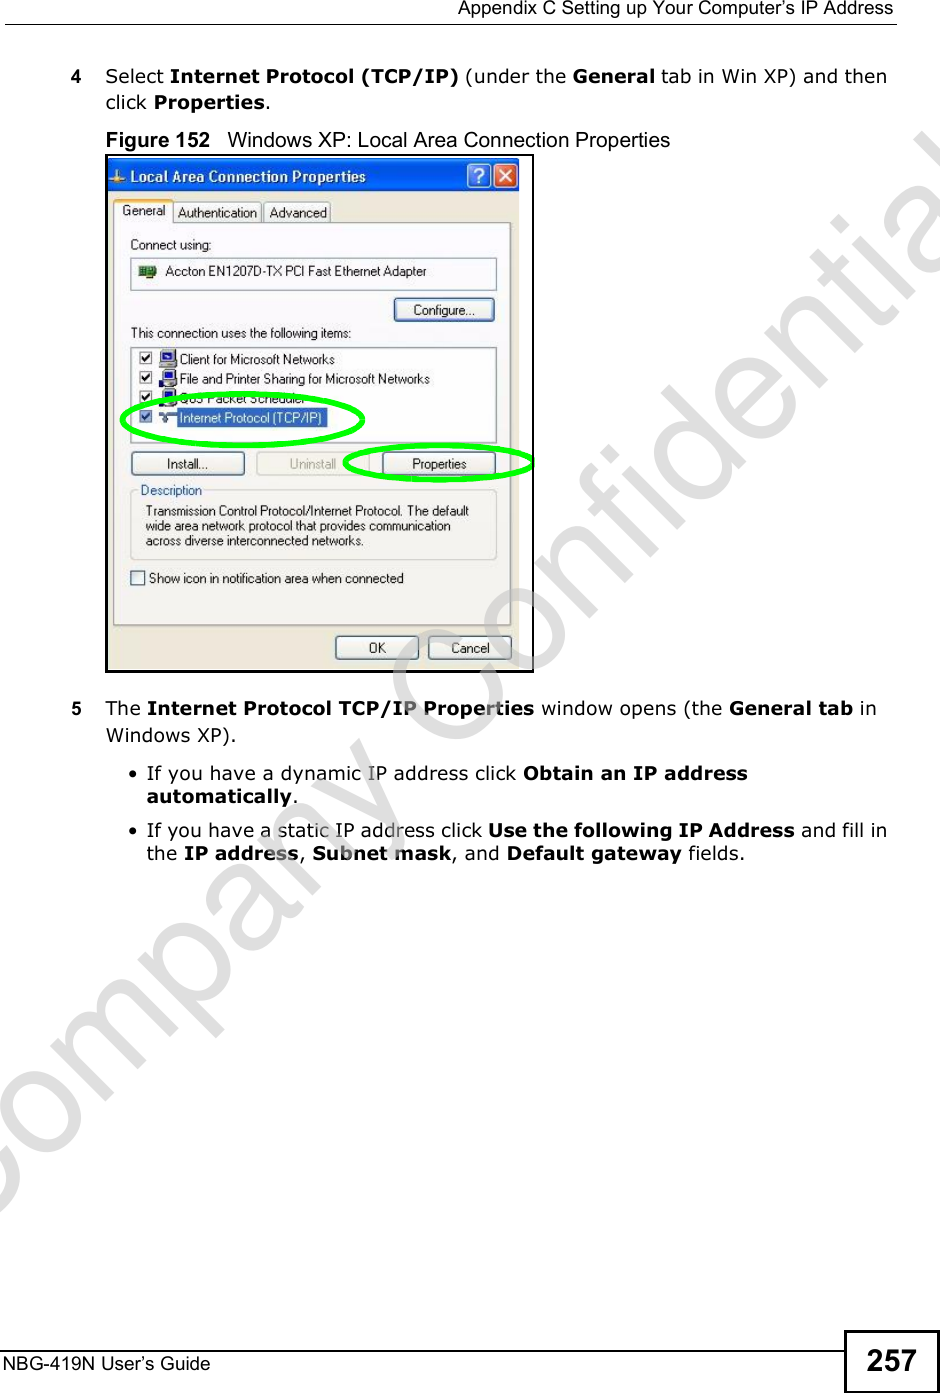  Appendix CSetting up Your Computer s IP AddressNBG-419N User s Guide 2574Select Internet Protocol (TCP/IP) (under the General tab in Win XP) and then click Properties.Figure 152   Windows XP: Local Area Connection Properties5The Internet Protocol TCP/IP Properties window opens (the General tab in Windows XP). If you have a dynamic IP address click Obtain an IP address automatically. If you have a static IP address click Use the following IP Address and fill in the IP address, Subnet mask, and Default gateway fields. Company Confidential